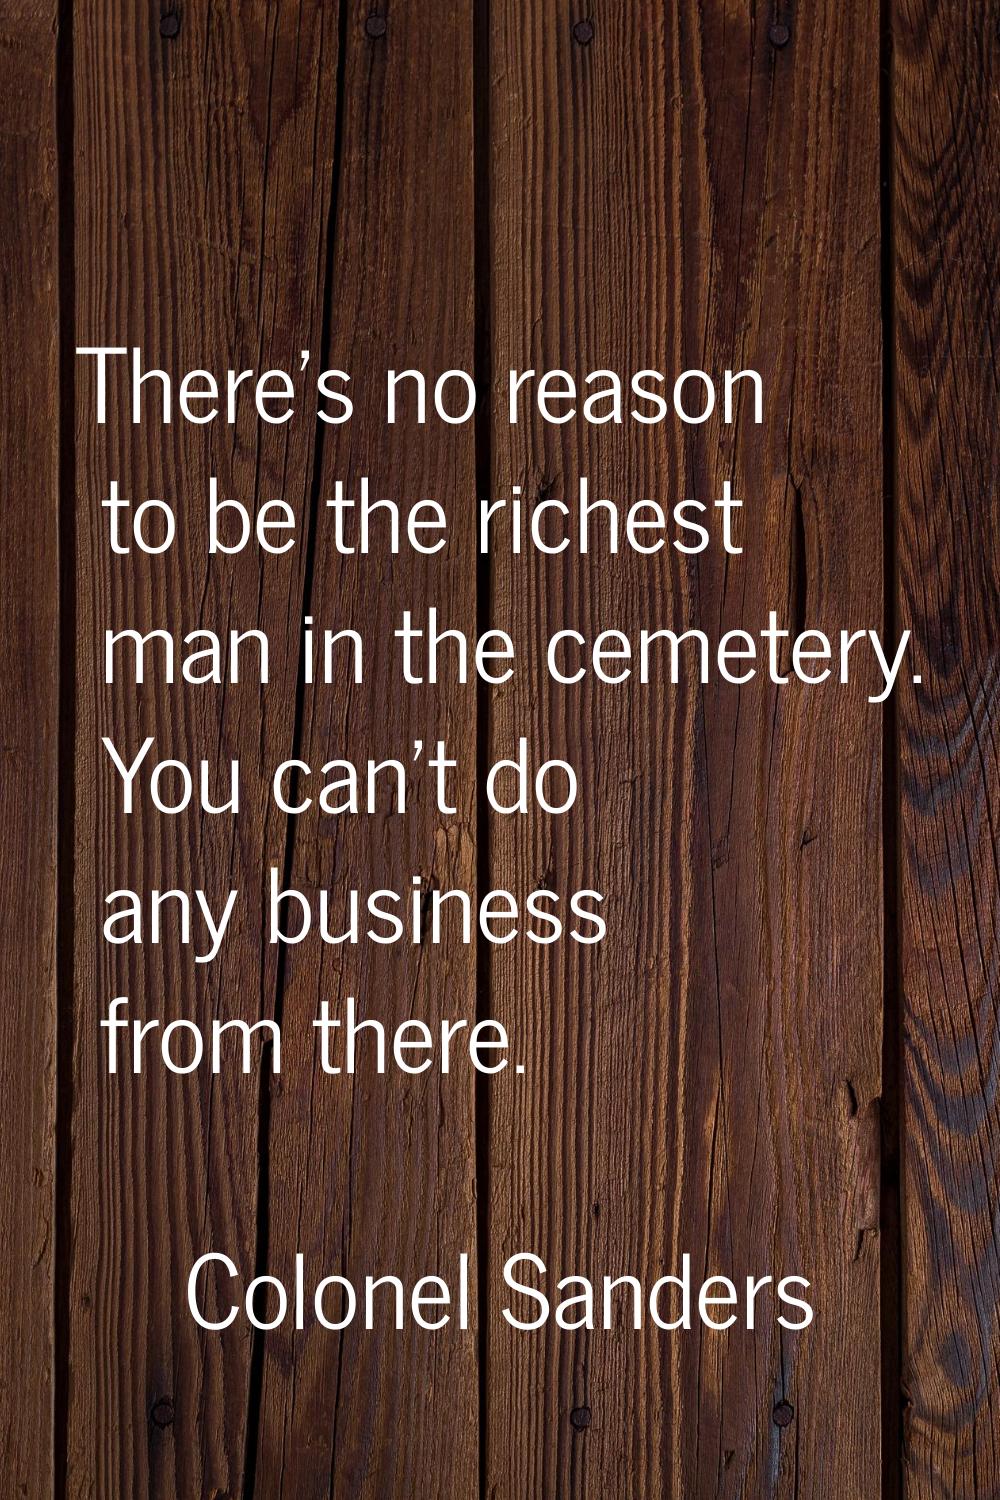 There's no reason to be the richest man in the cemetery. You can't do any business from there.